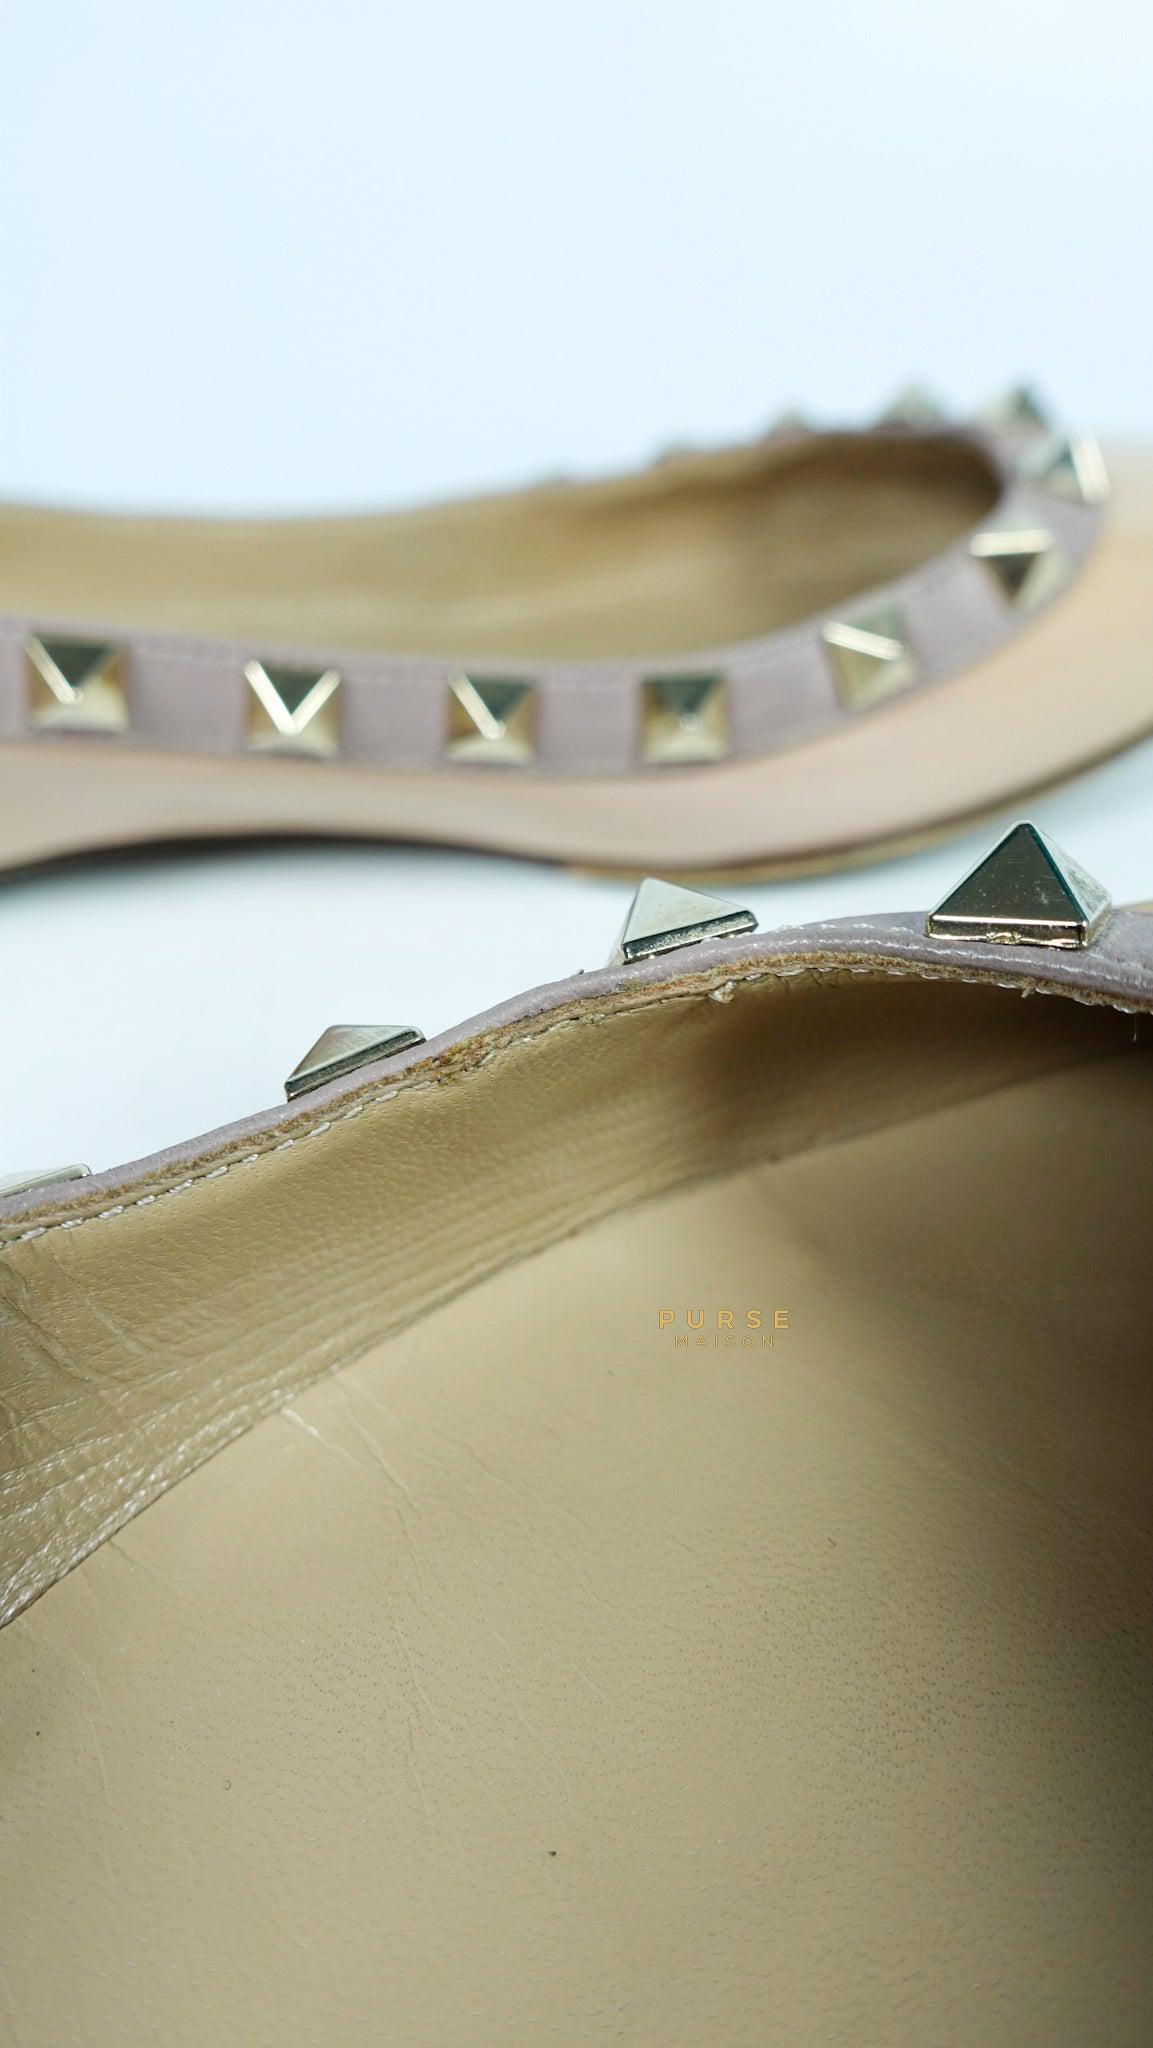 Valentino Rockstud Ballerina in Nude Patent Leather Shoes (Size 37 EUR, 25cm)